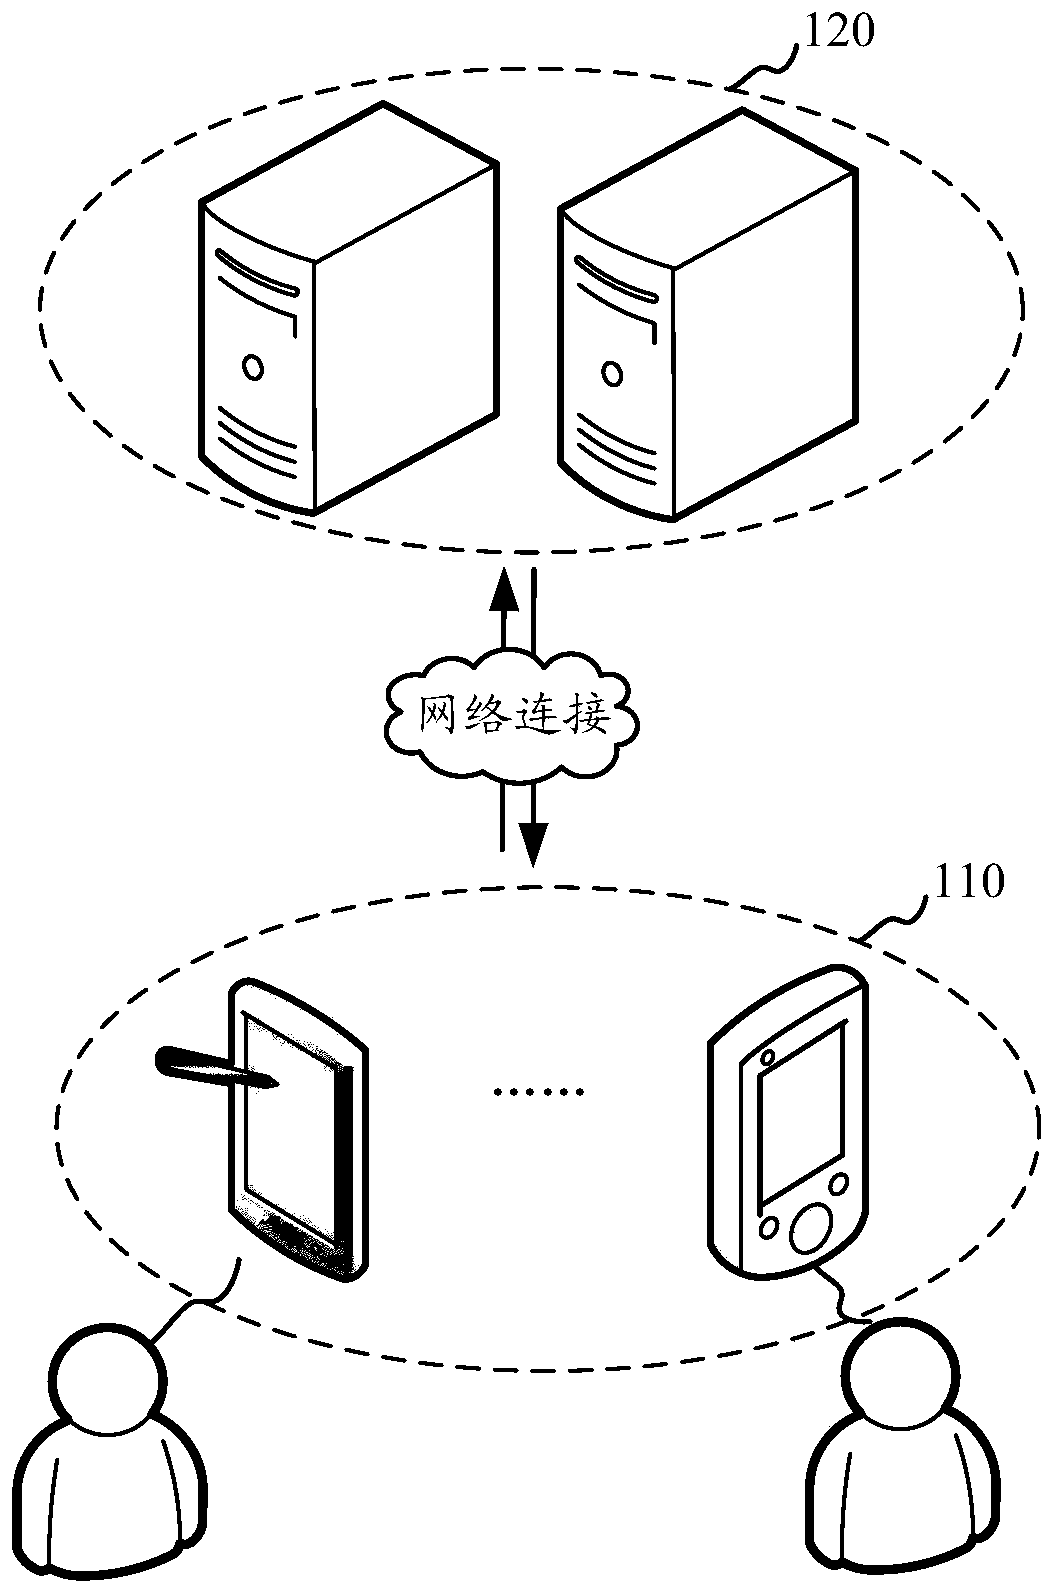 Media information recommendation method and device, storage medium and computer equipment